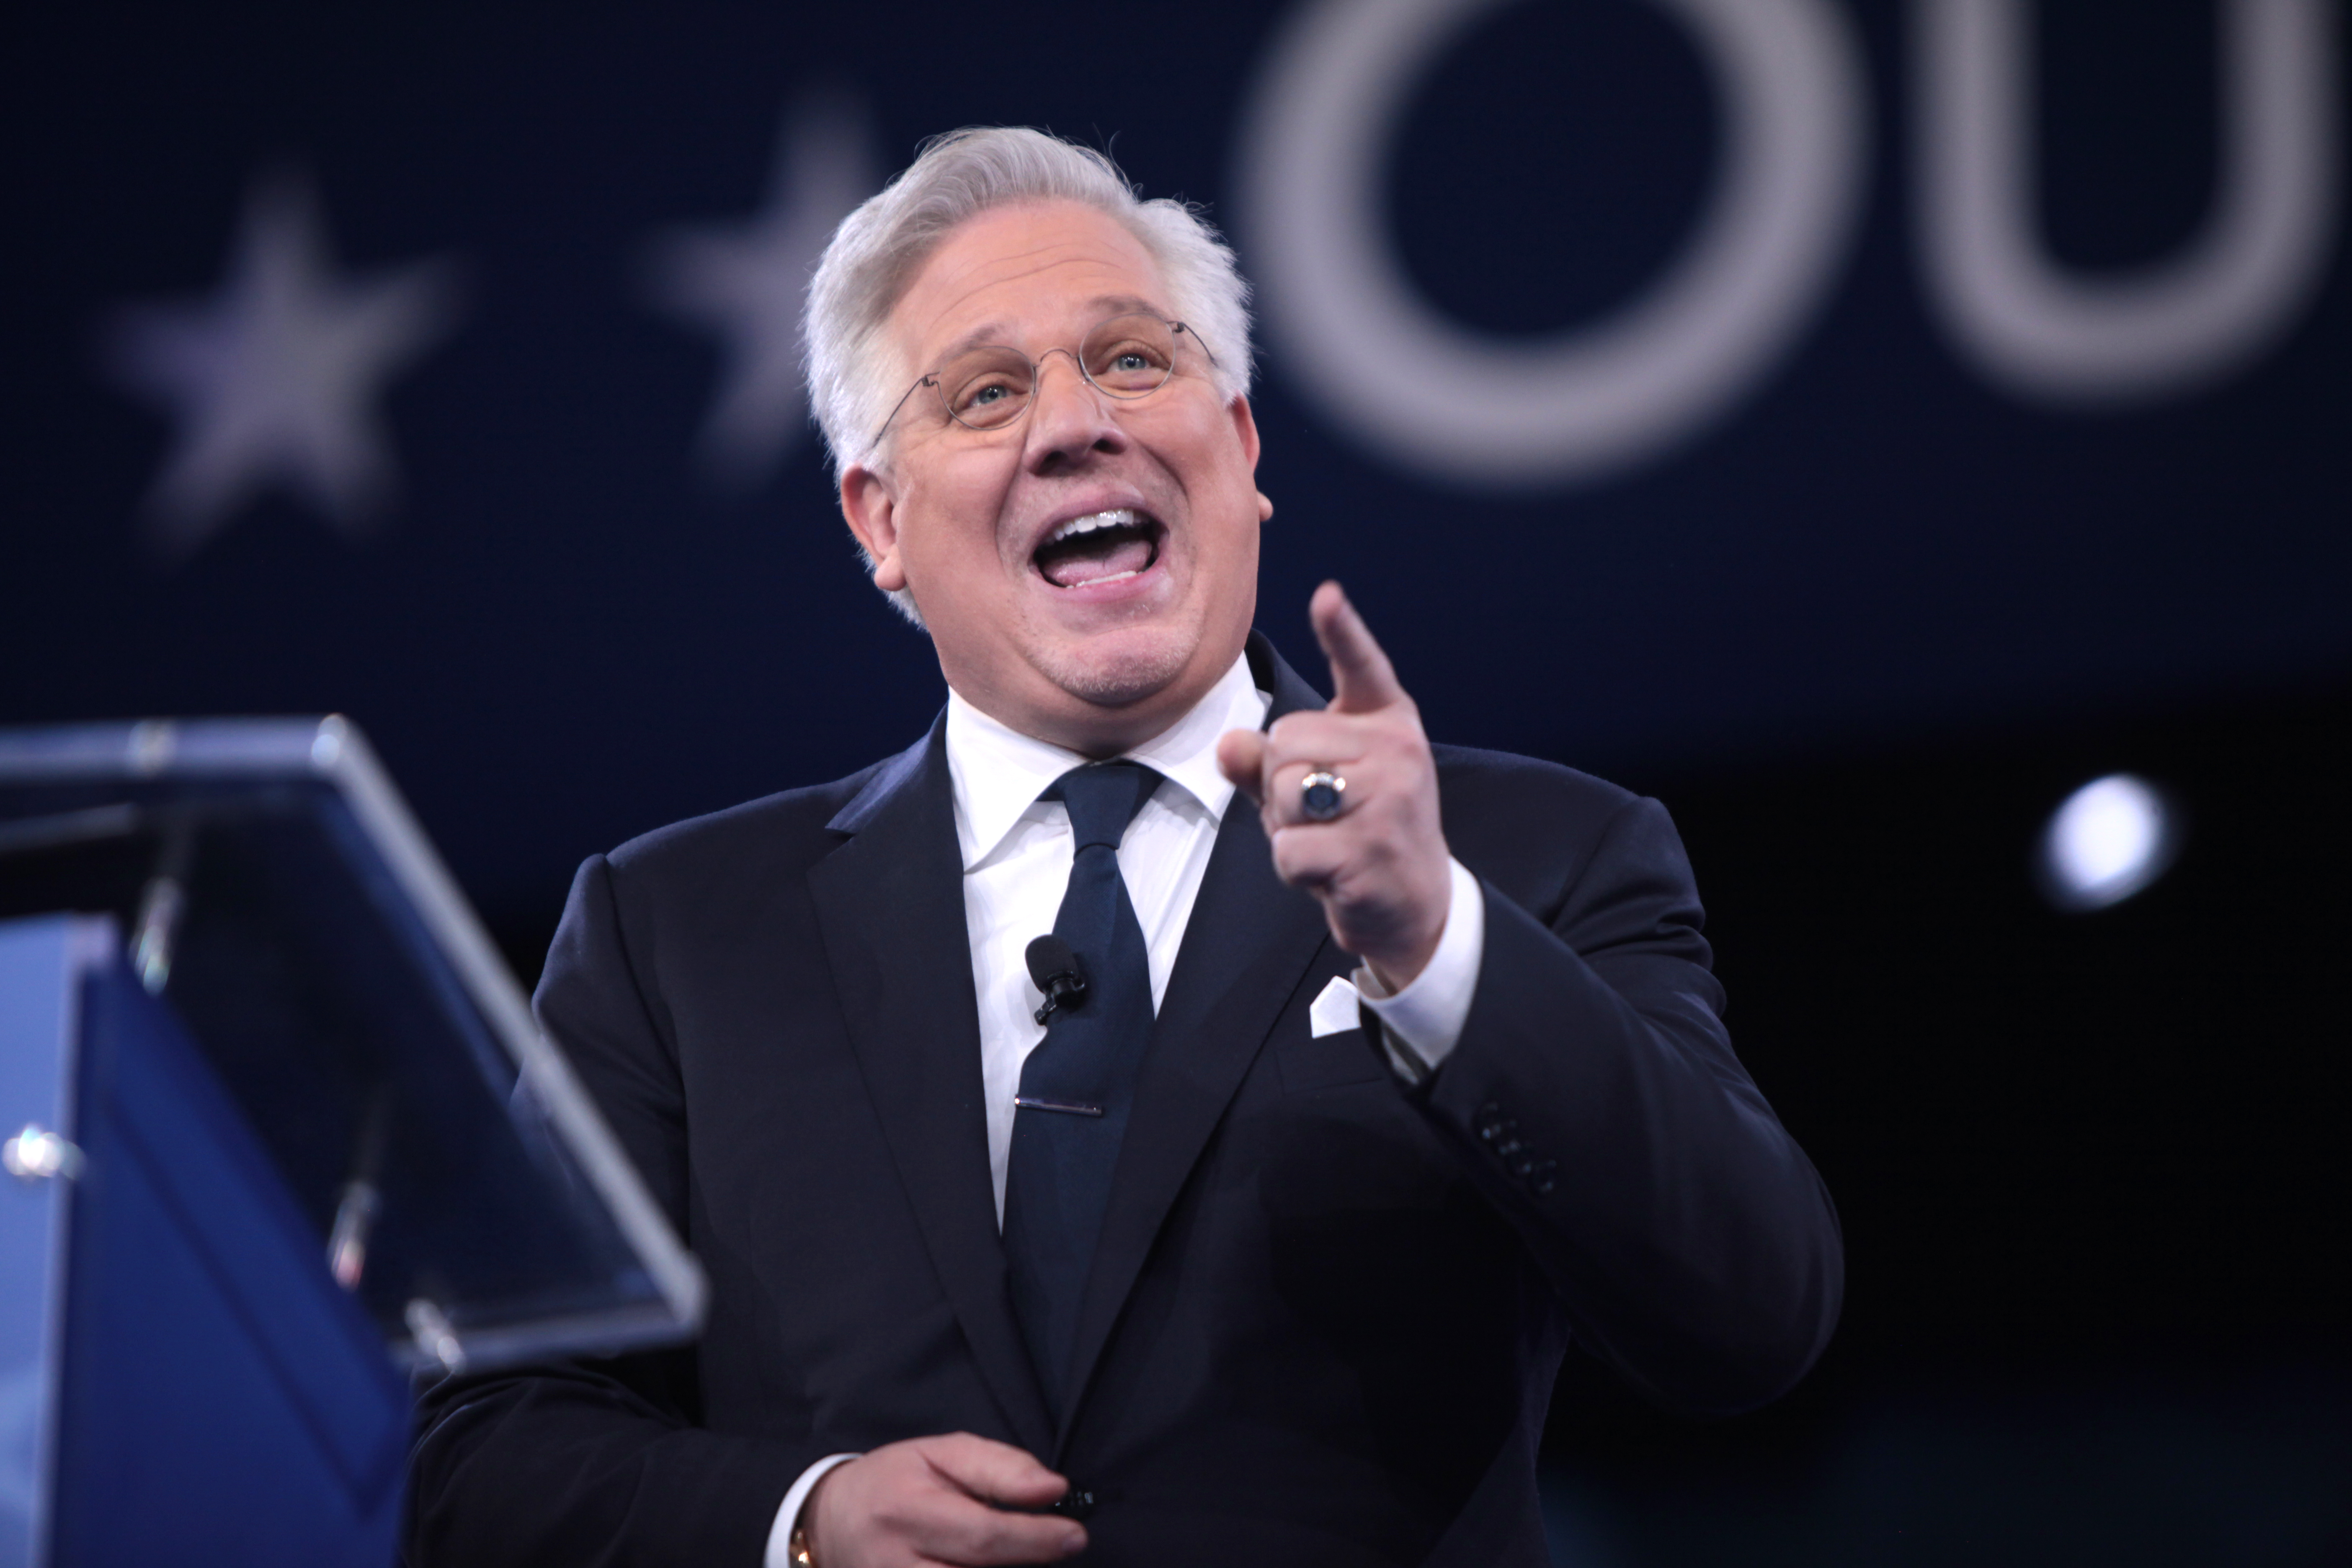 Glenn Beck and Artificial Intelligence